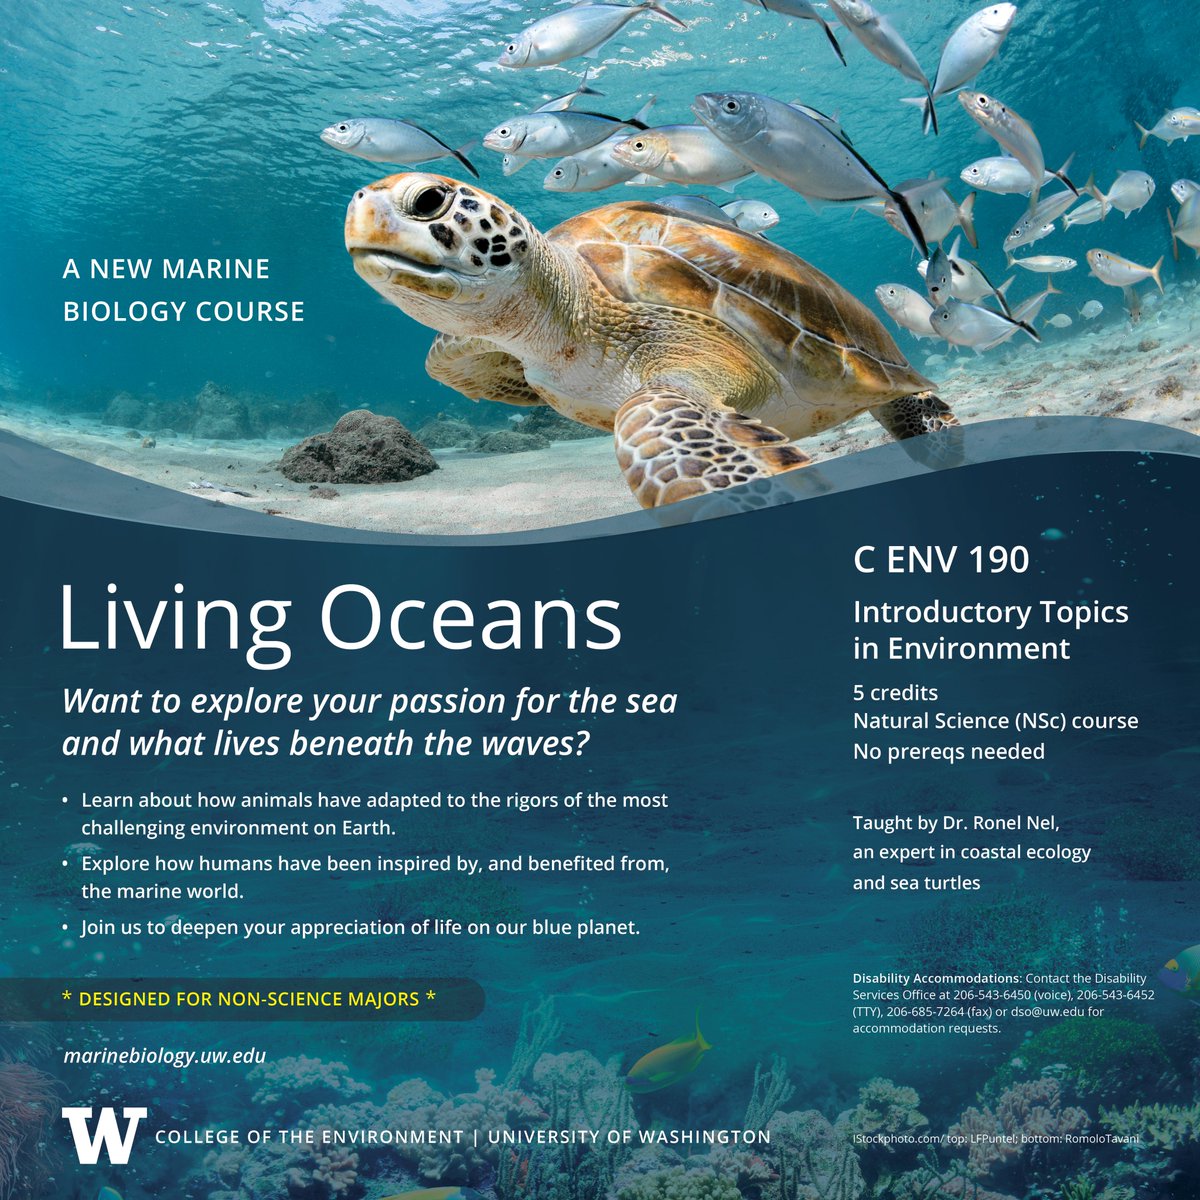 📢 NEW COURSE ALERT 🐢Unveil the wonders of the ocean with a @UW #MarineBiology course taught by Dr. Nel, who specializes in coastal ecology & sea turtles. 👉Designed for non-science majors 👉5 credits 👉No pre-reqs needed 👉Starting in winter 🔵Sign up marinebiology.uw.edu/news-stories/2…